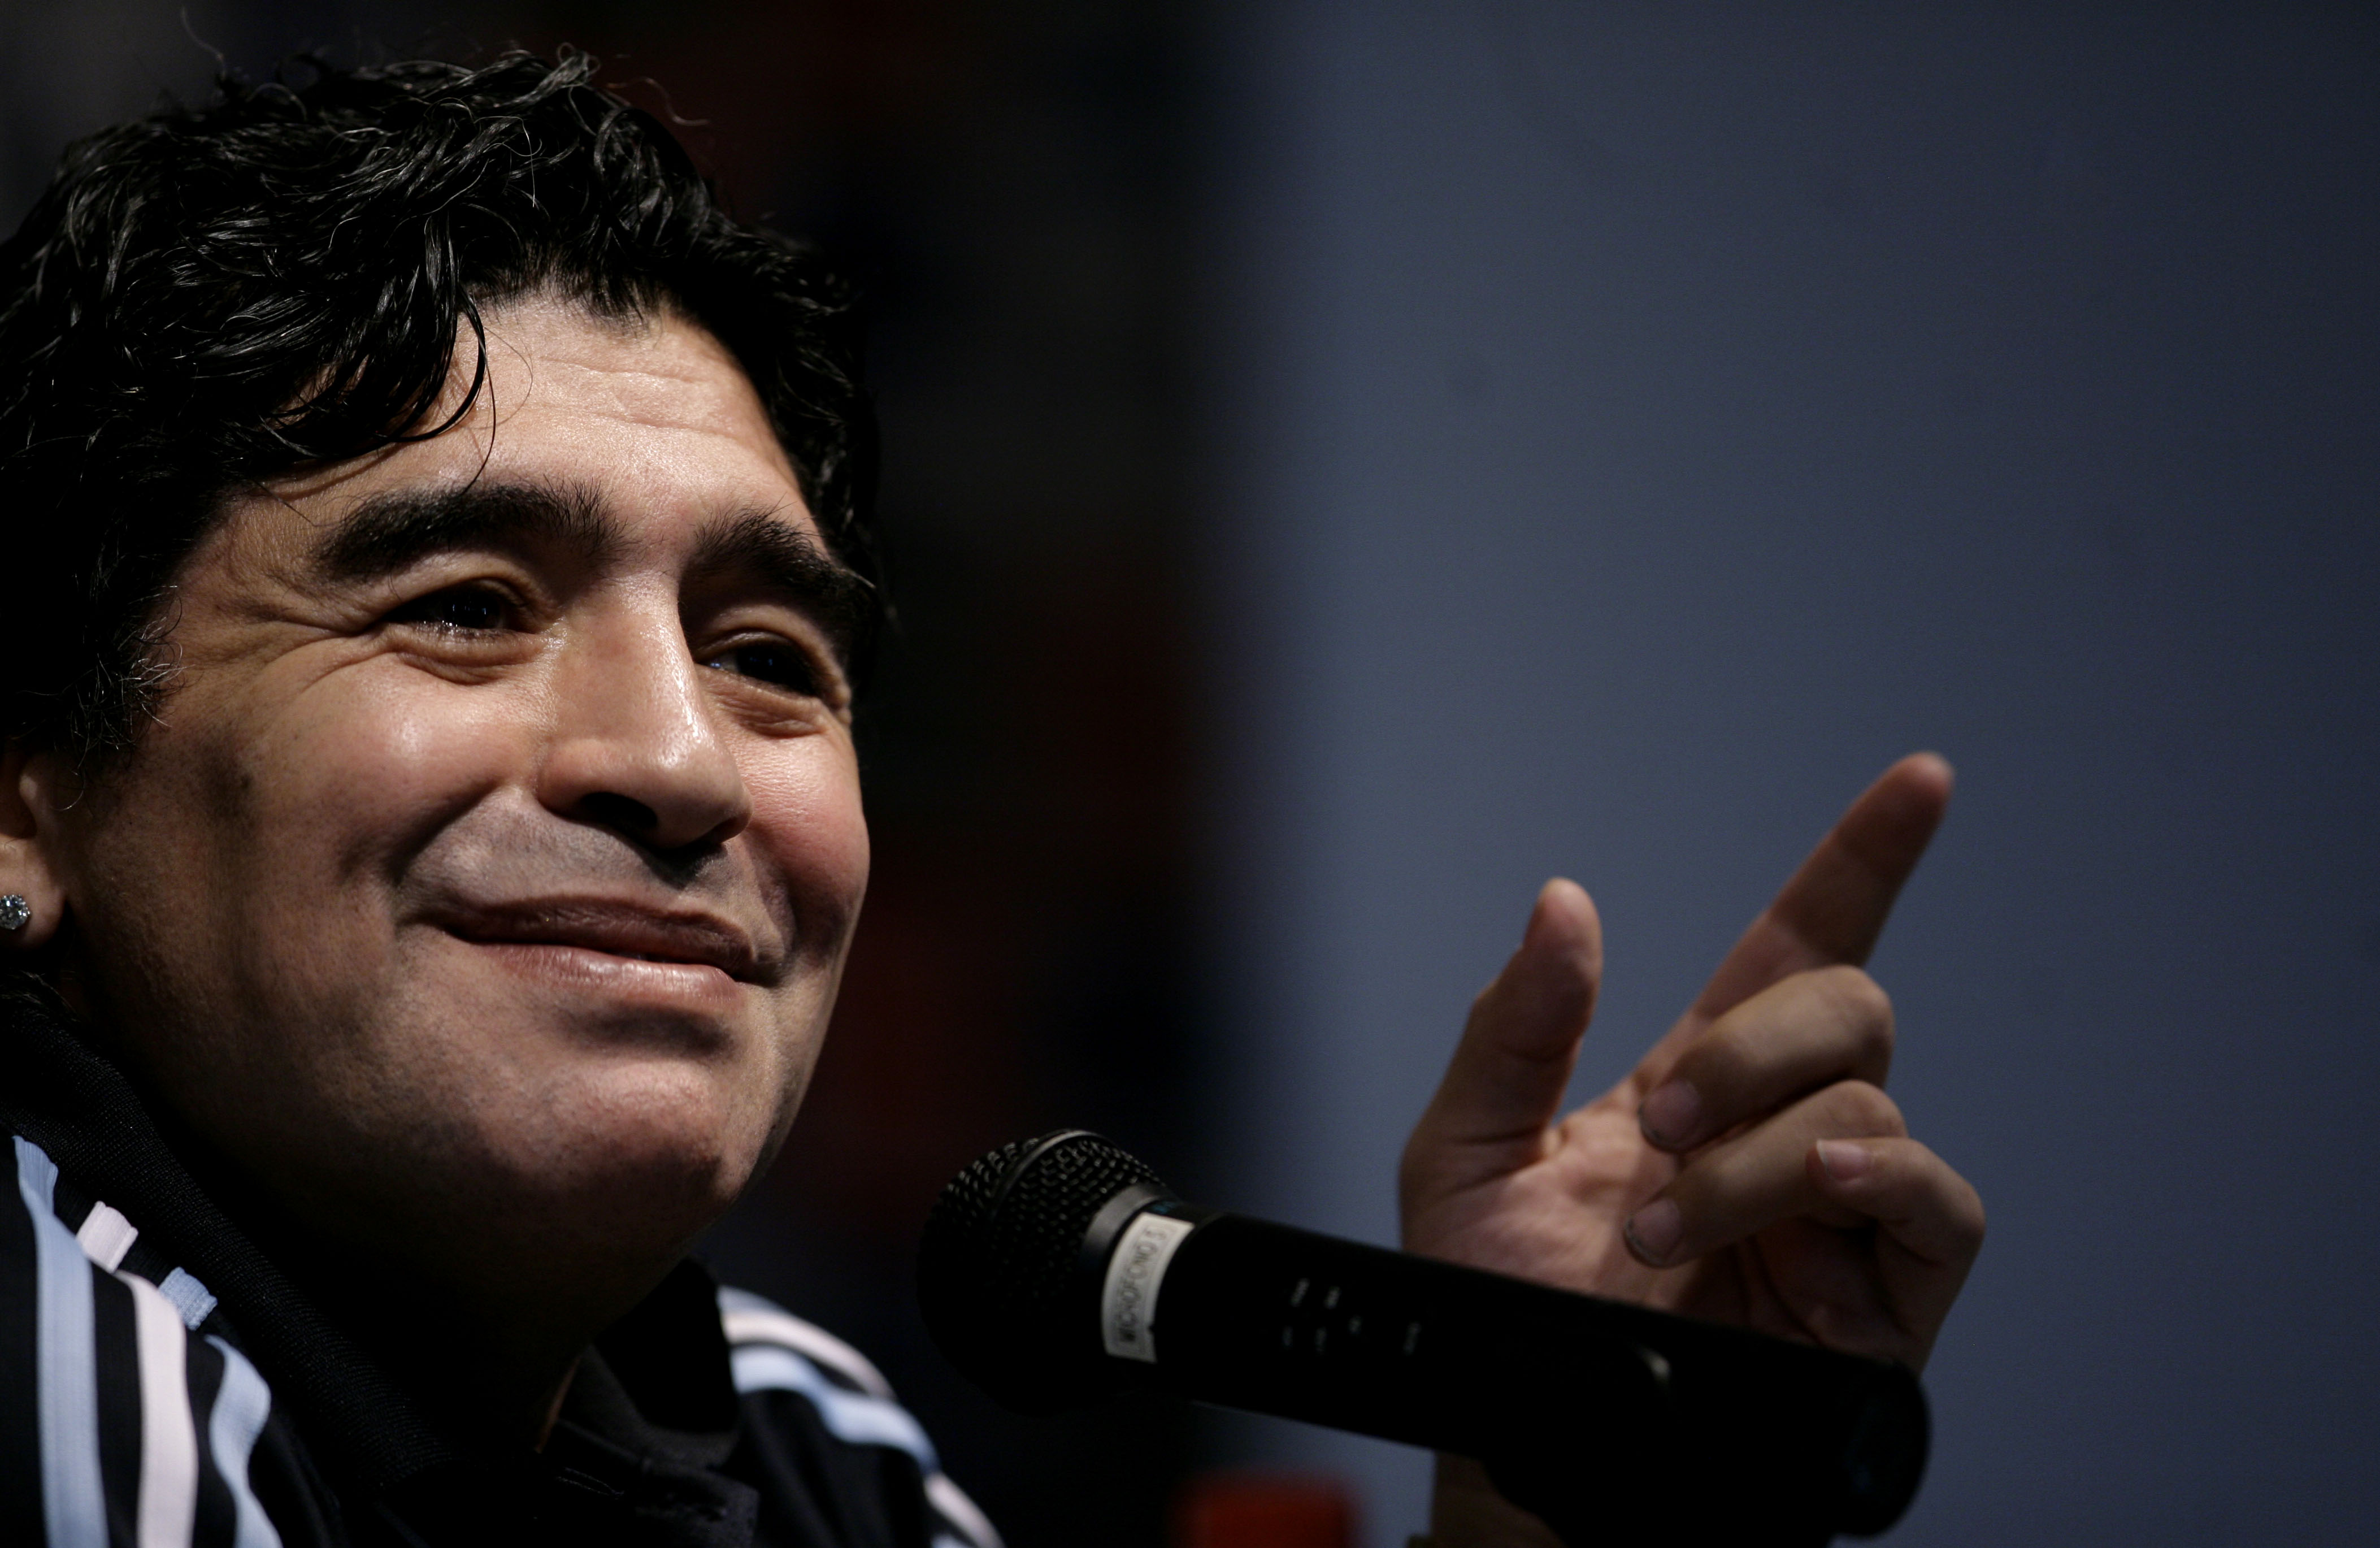 Diego Maradona, One Of The Greatest Soccer Players Of All-Time, Dies At 60